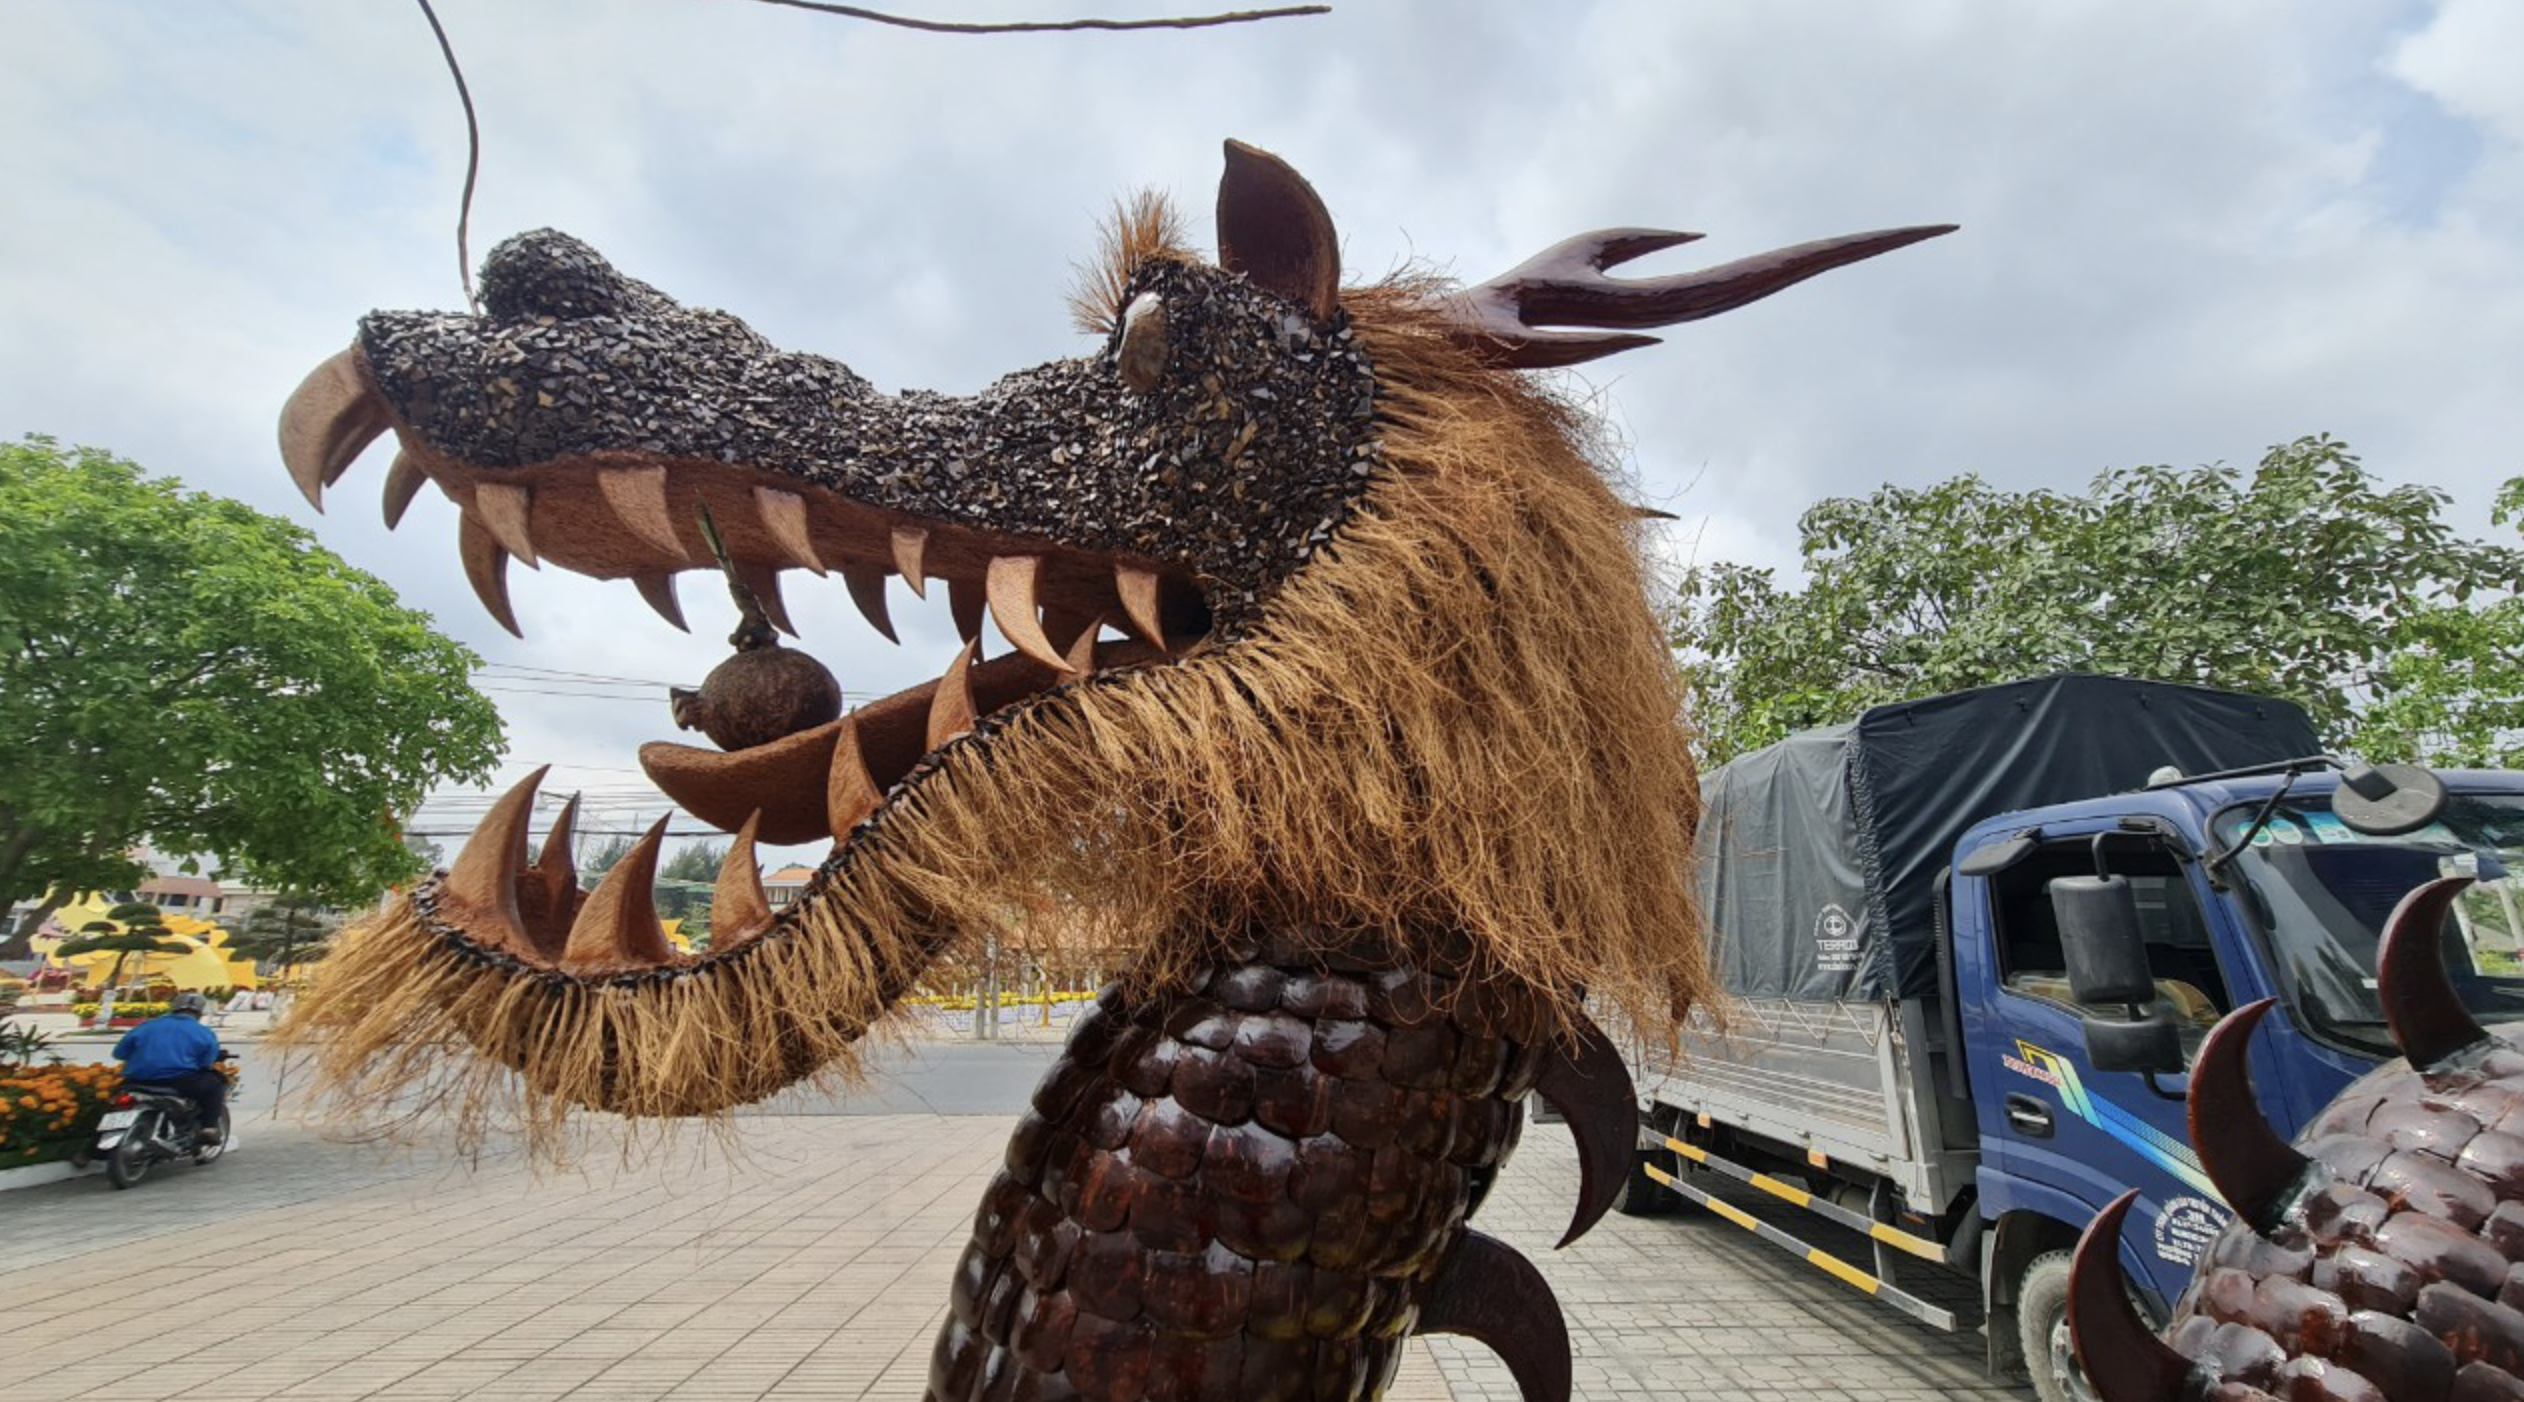 The head of the dragon mascot in Ben Tre Province, southern Vietnam, was made from coconut coir, wood and shells. Photo: Tuoi Tre